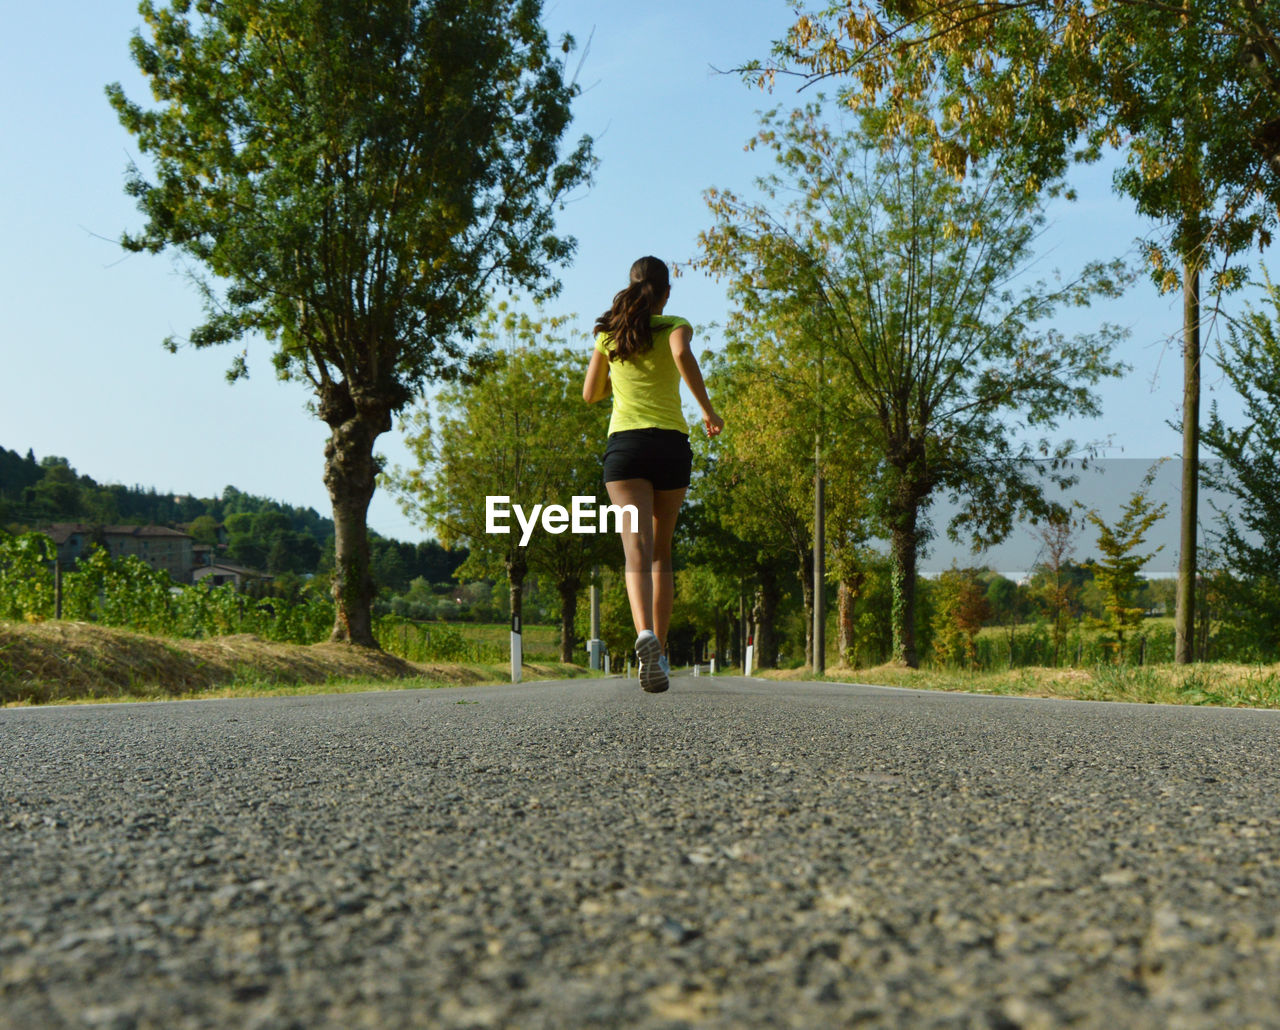 Rear view of young woman running on road against sky